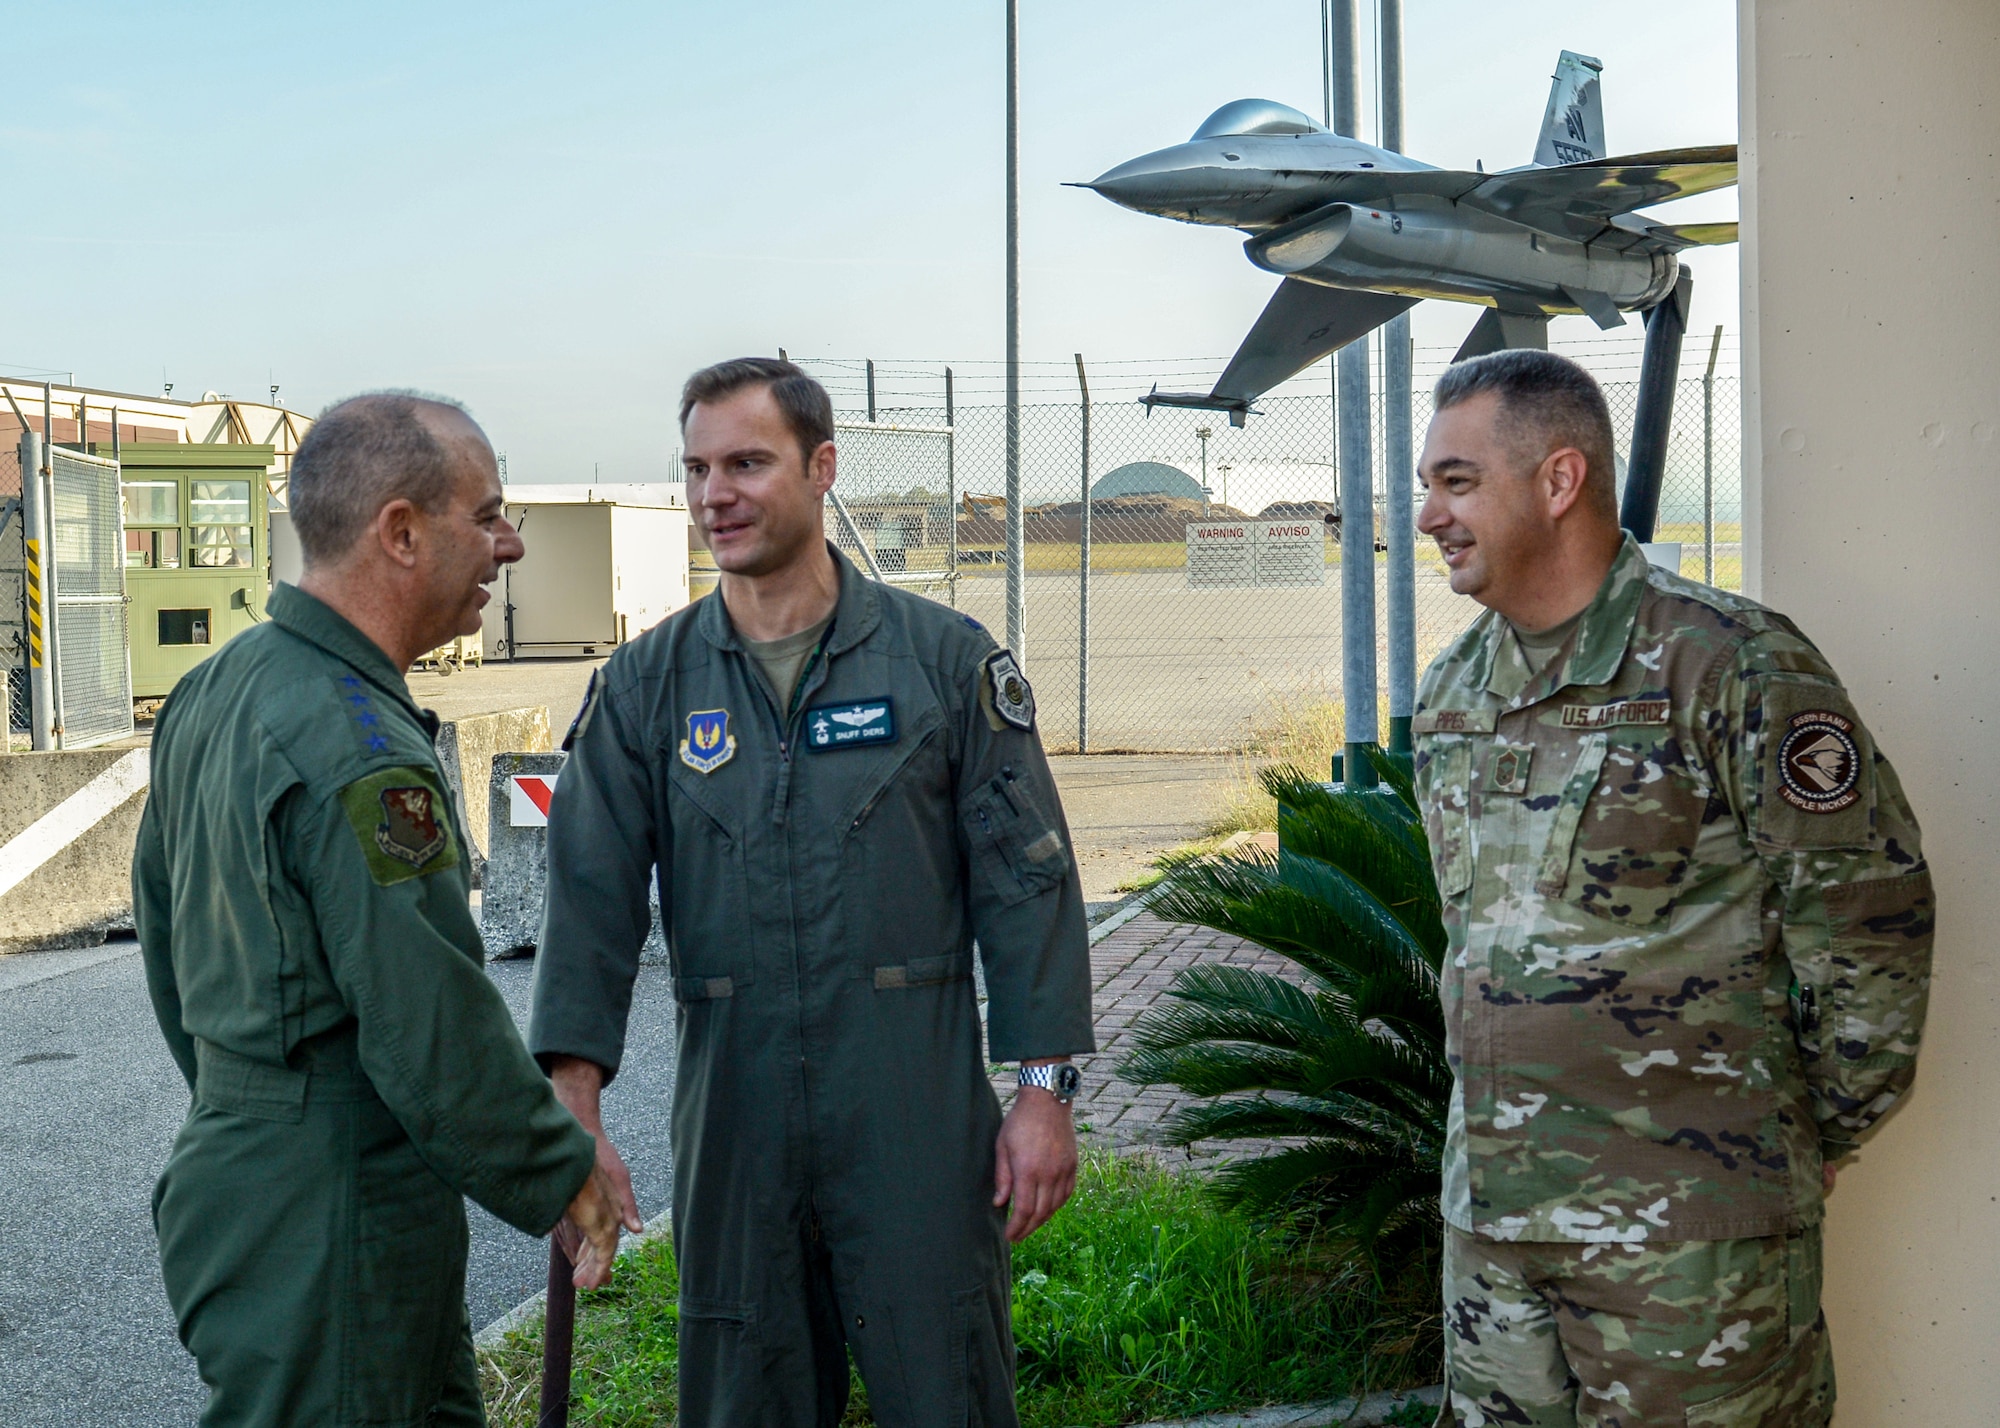 U.S. Air Force Gen. Jeff L. Harrigian, U.S. Air Forces in Europe and Air Forces Africa commander, shakes hands with Chief Master Sgt. Matthew Pipes, 31st Aircraft Maintenance Squadron, 555th Aircraft Maintenance Unit superintendent, at Aviano Air Base, Italy, Oct. 22, 2019.